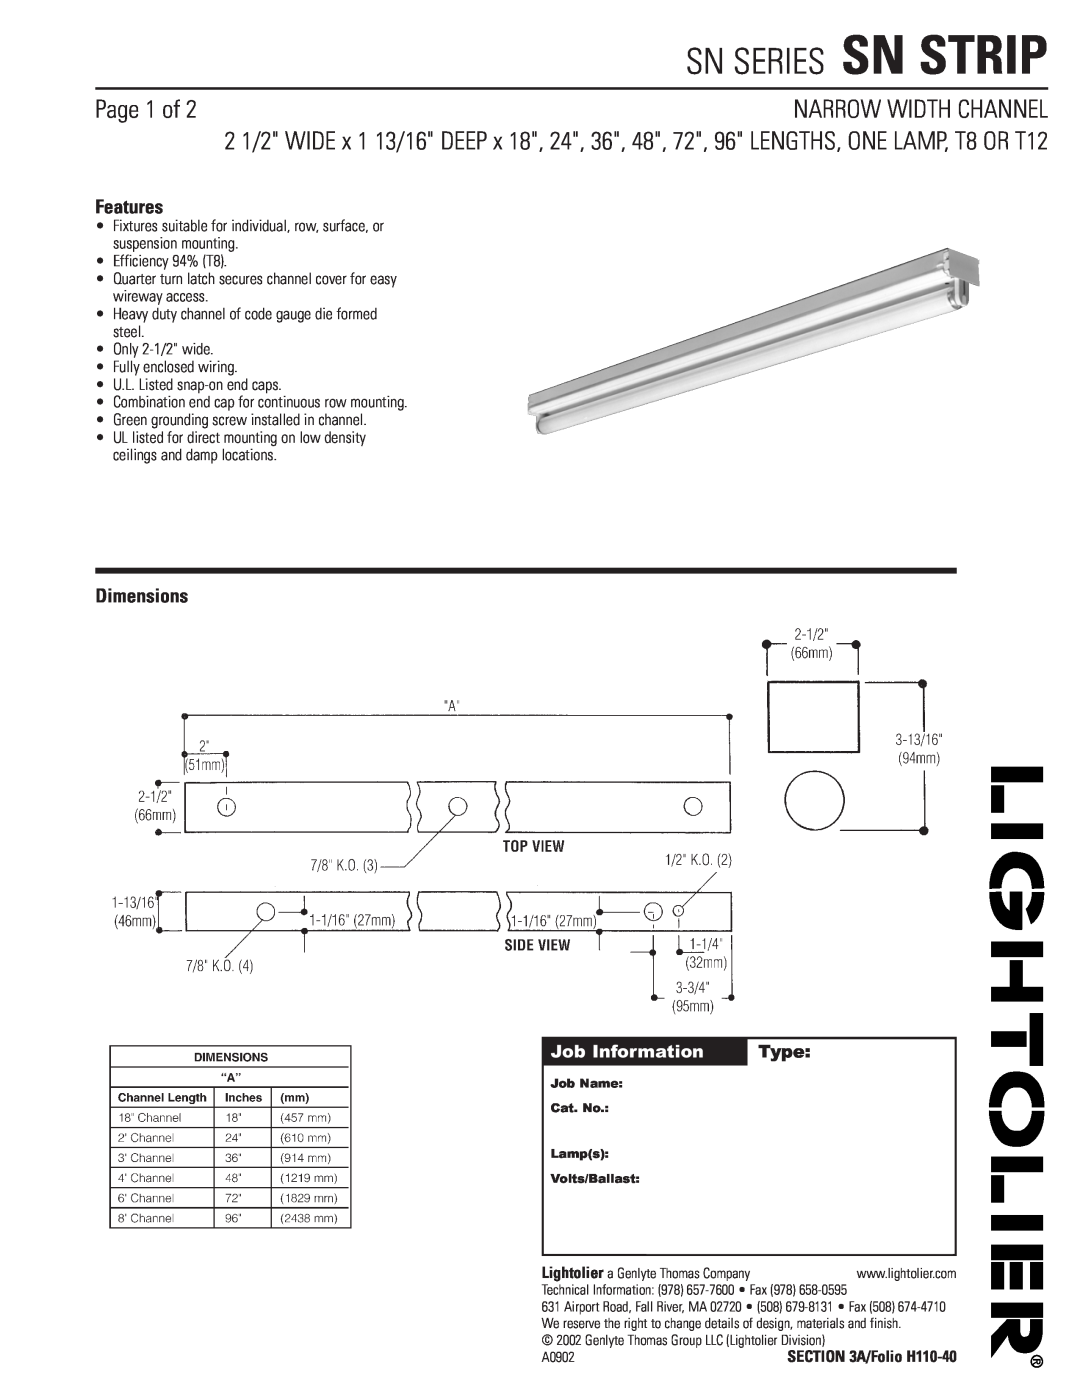 Lightolier SN STRIP dimensions Sn Series Sn Strip, Narrow Width Channel, Page 1 of, Features, Dimensions, Job Information 